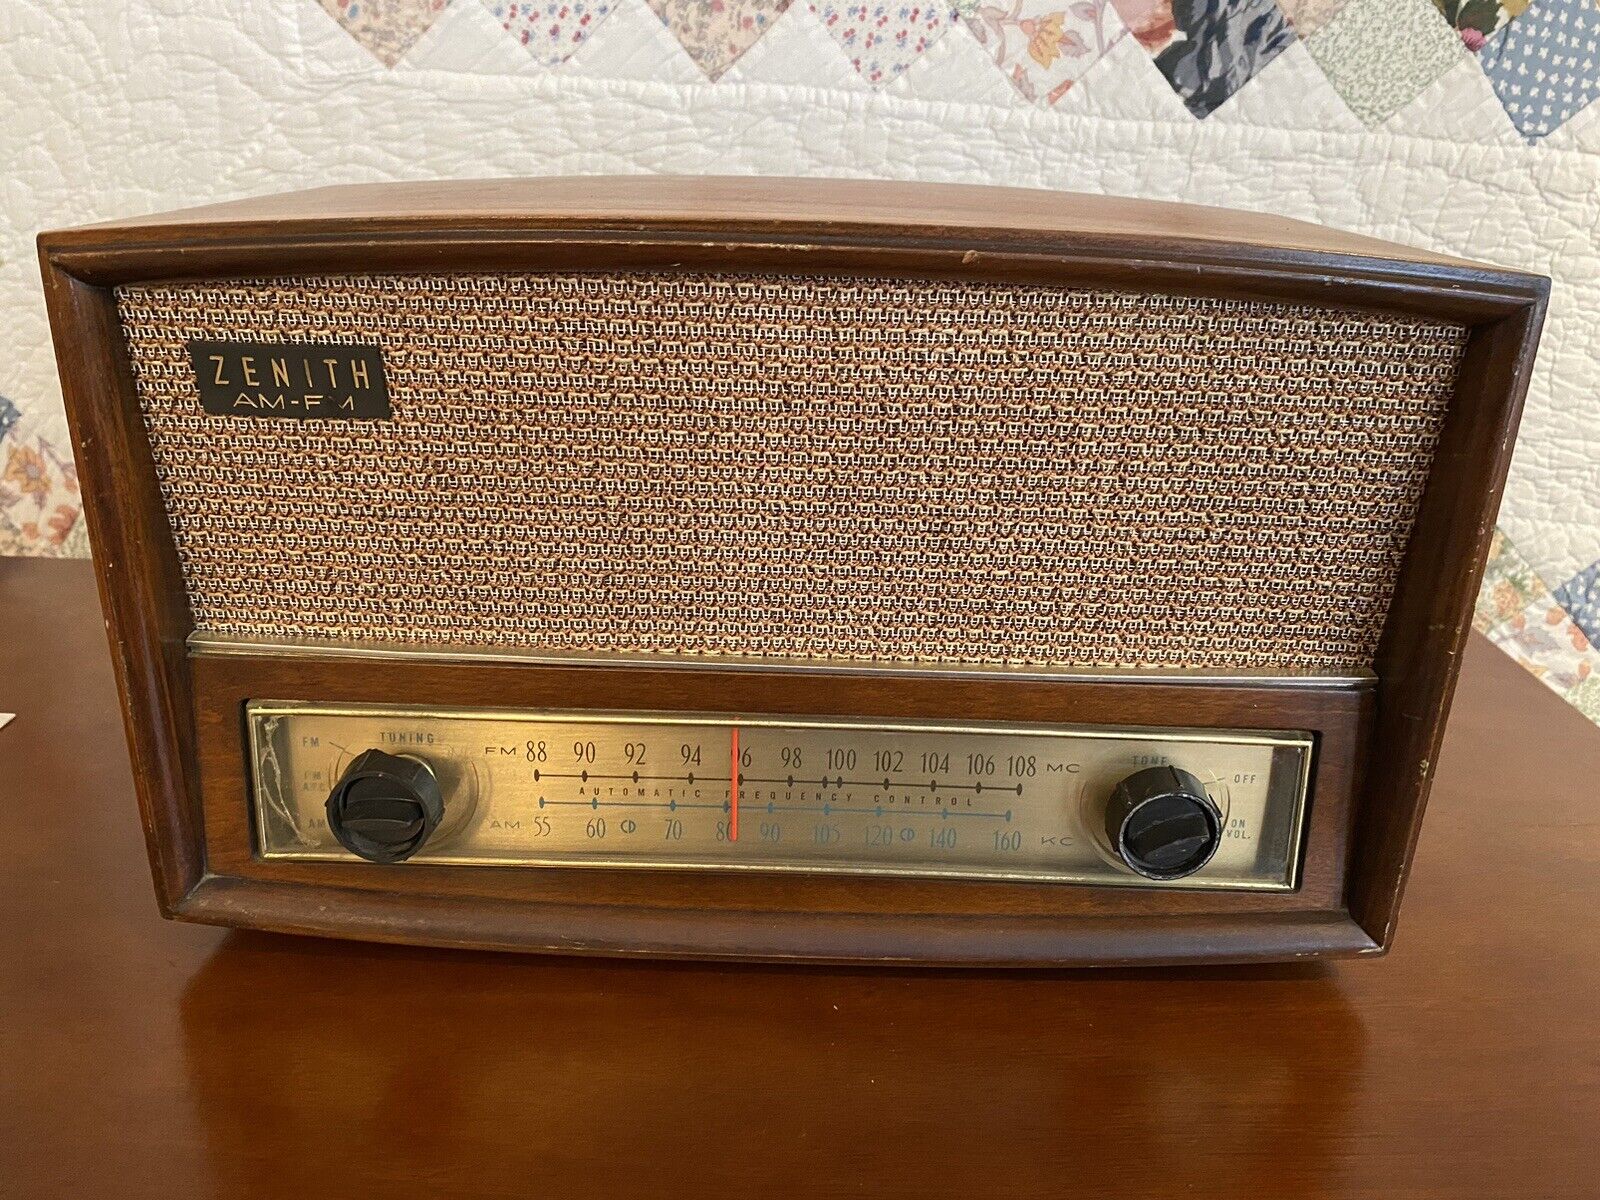 Zenith G730 AM/FM Tube Radio, 1950’s, Works And Sounds Great